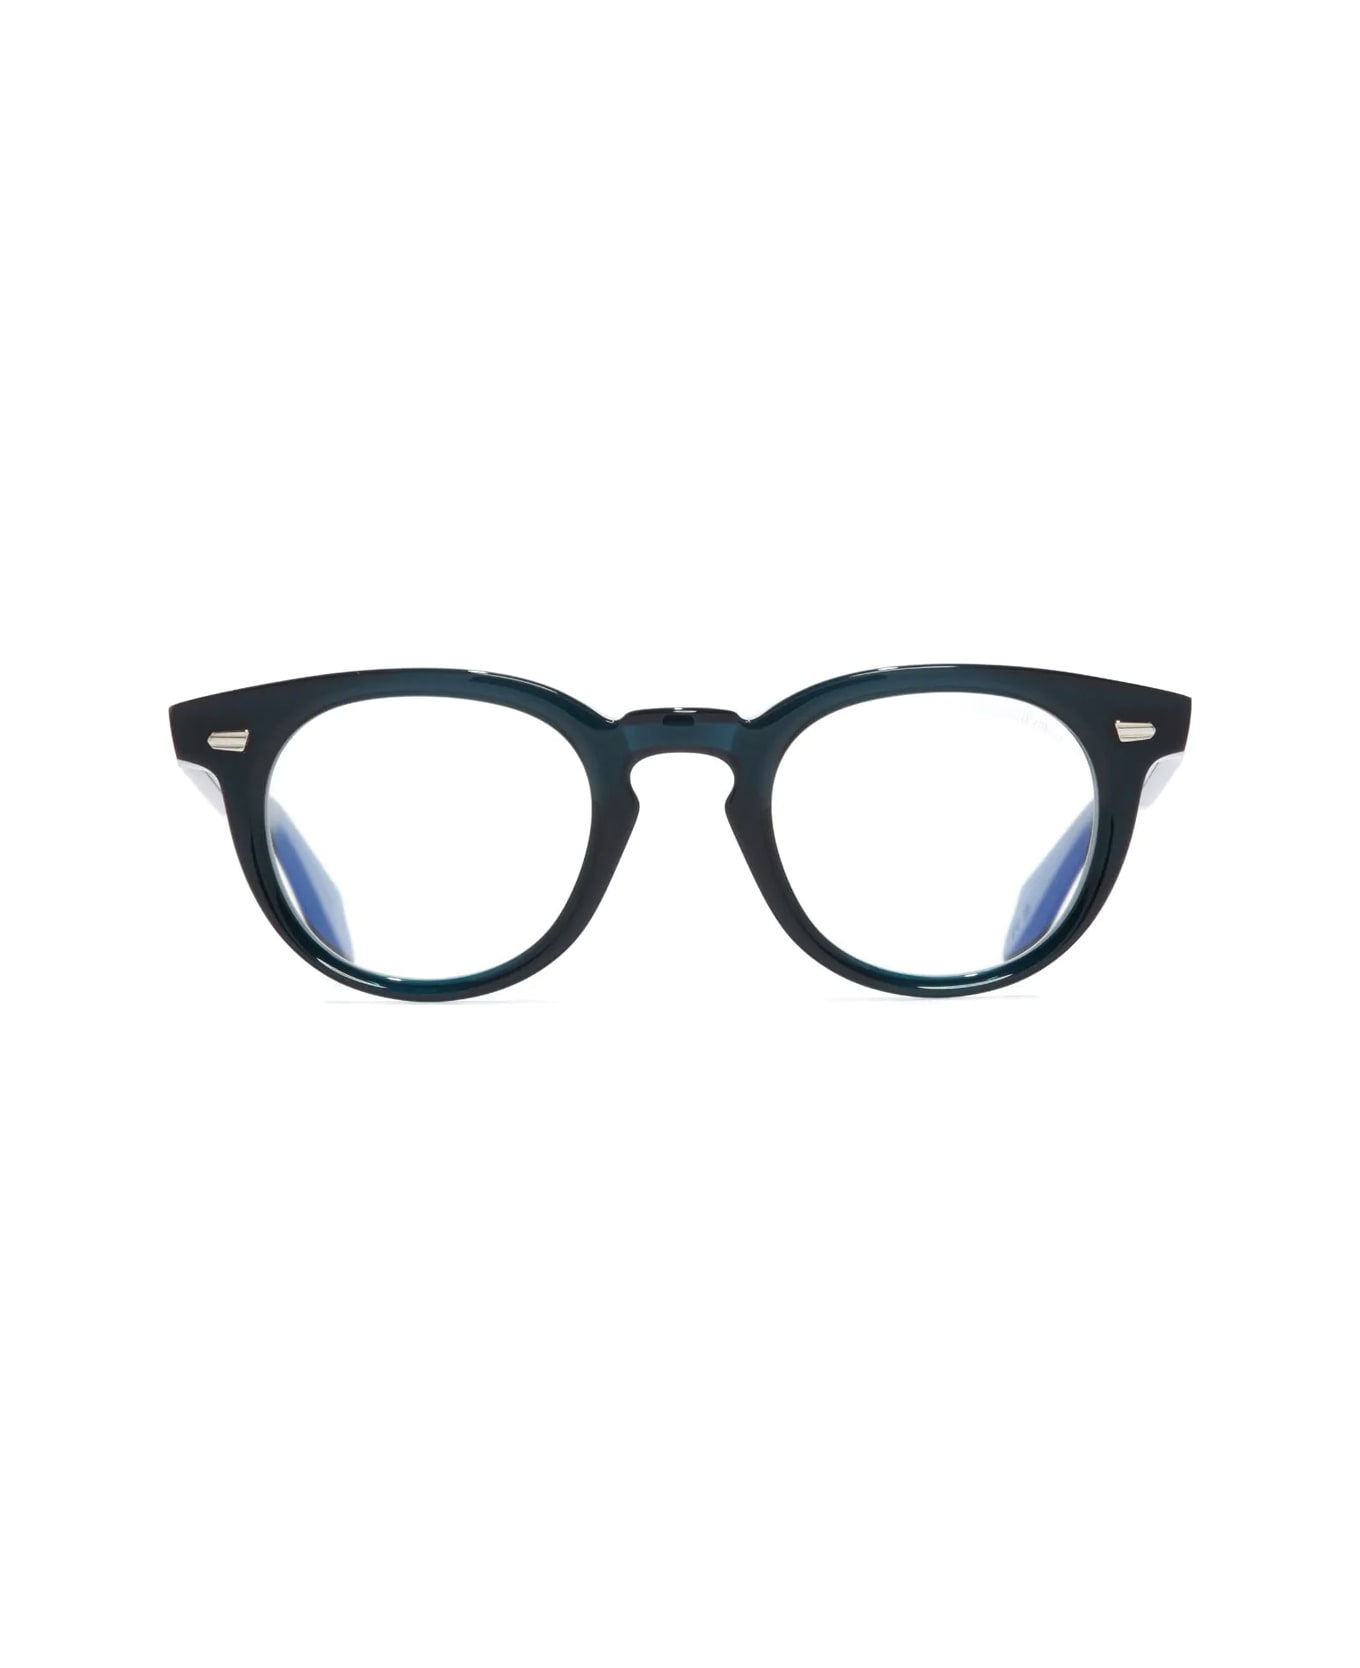 Cutler and Gross 1405 03 Glasses - Grigio